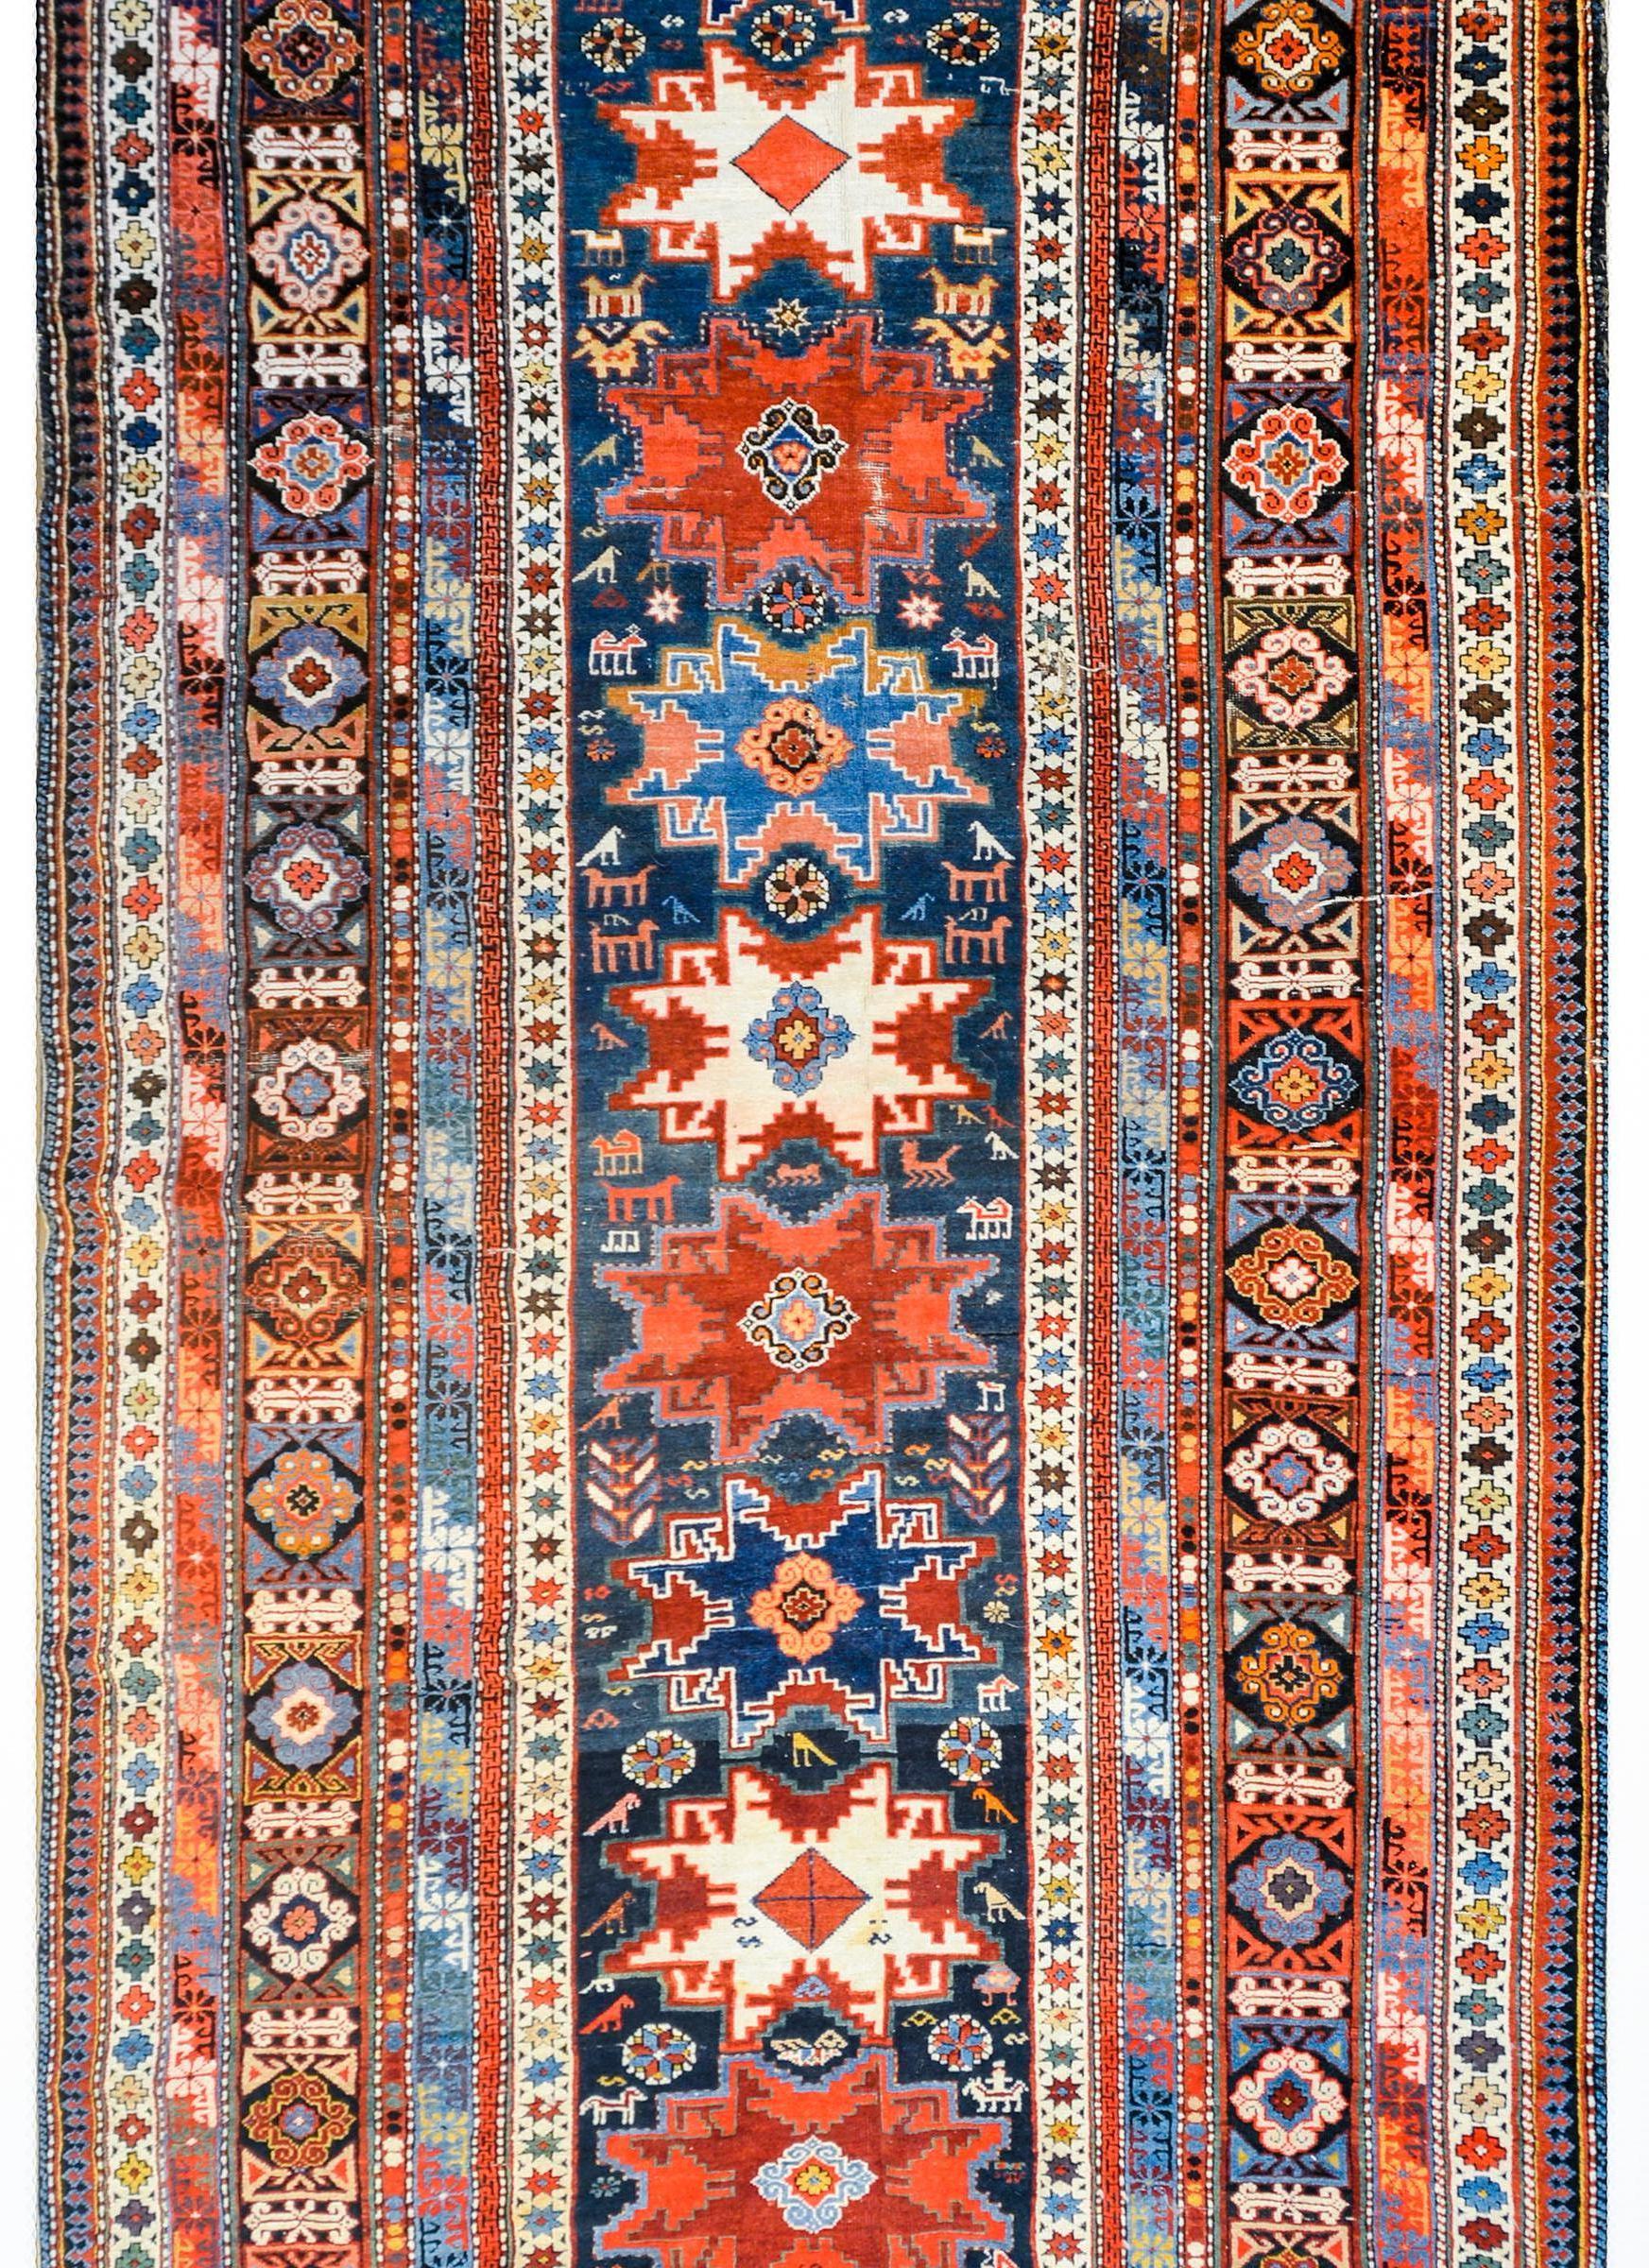 An amazing early 20th century Azerbaijani Shirvan runner with several stylized flower medallions woven in crimson, white, and indigo, on an abrash indigo background amidst a field of flowers and birds. The border is incredible with multiple stripes